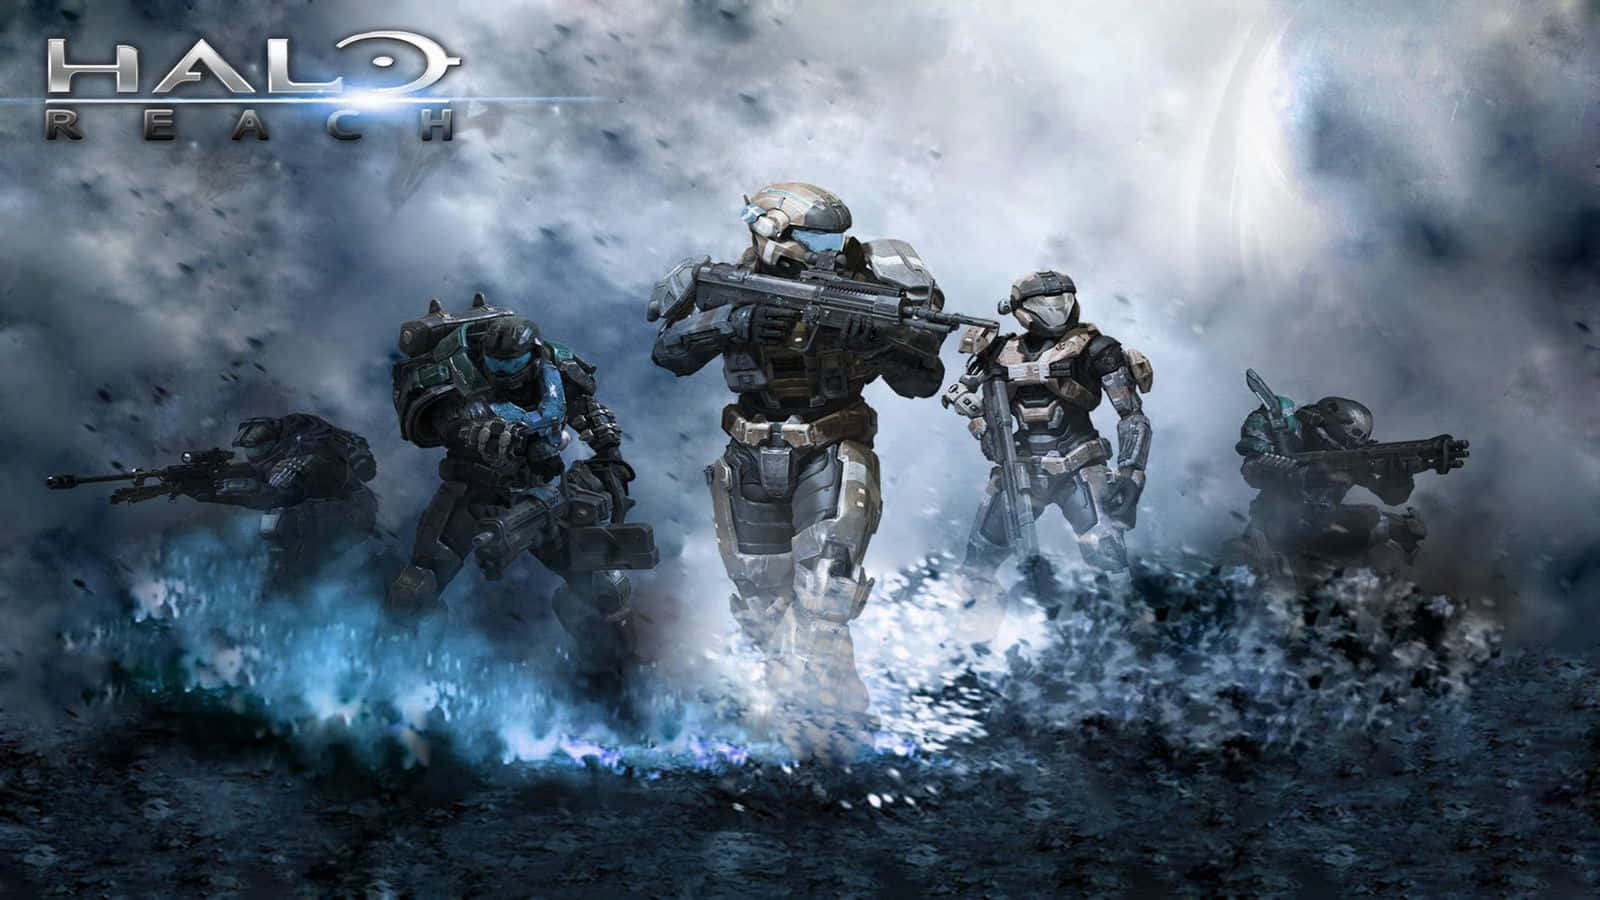 Halo 5 Blue Team in Action Wallpaper